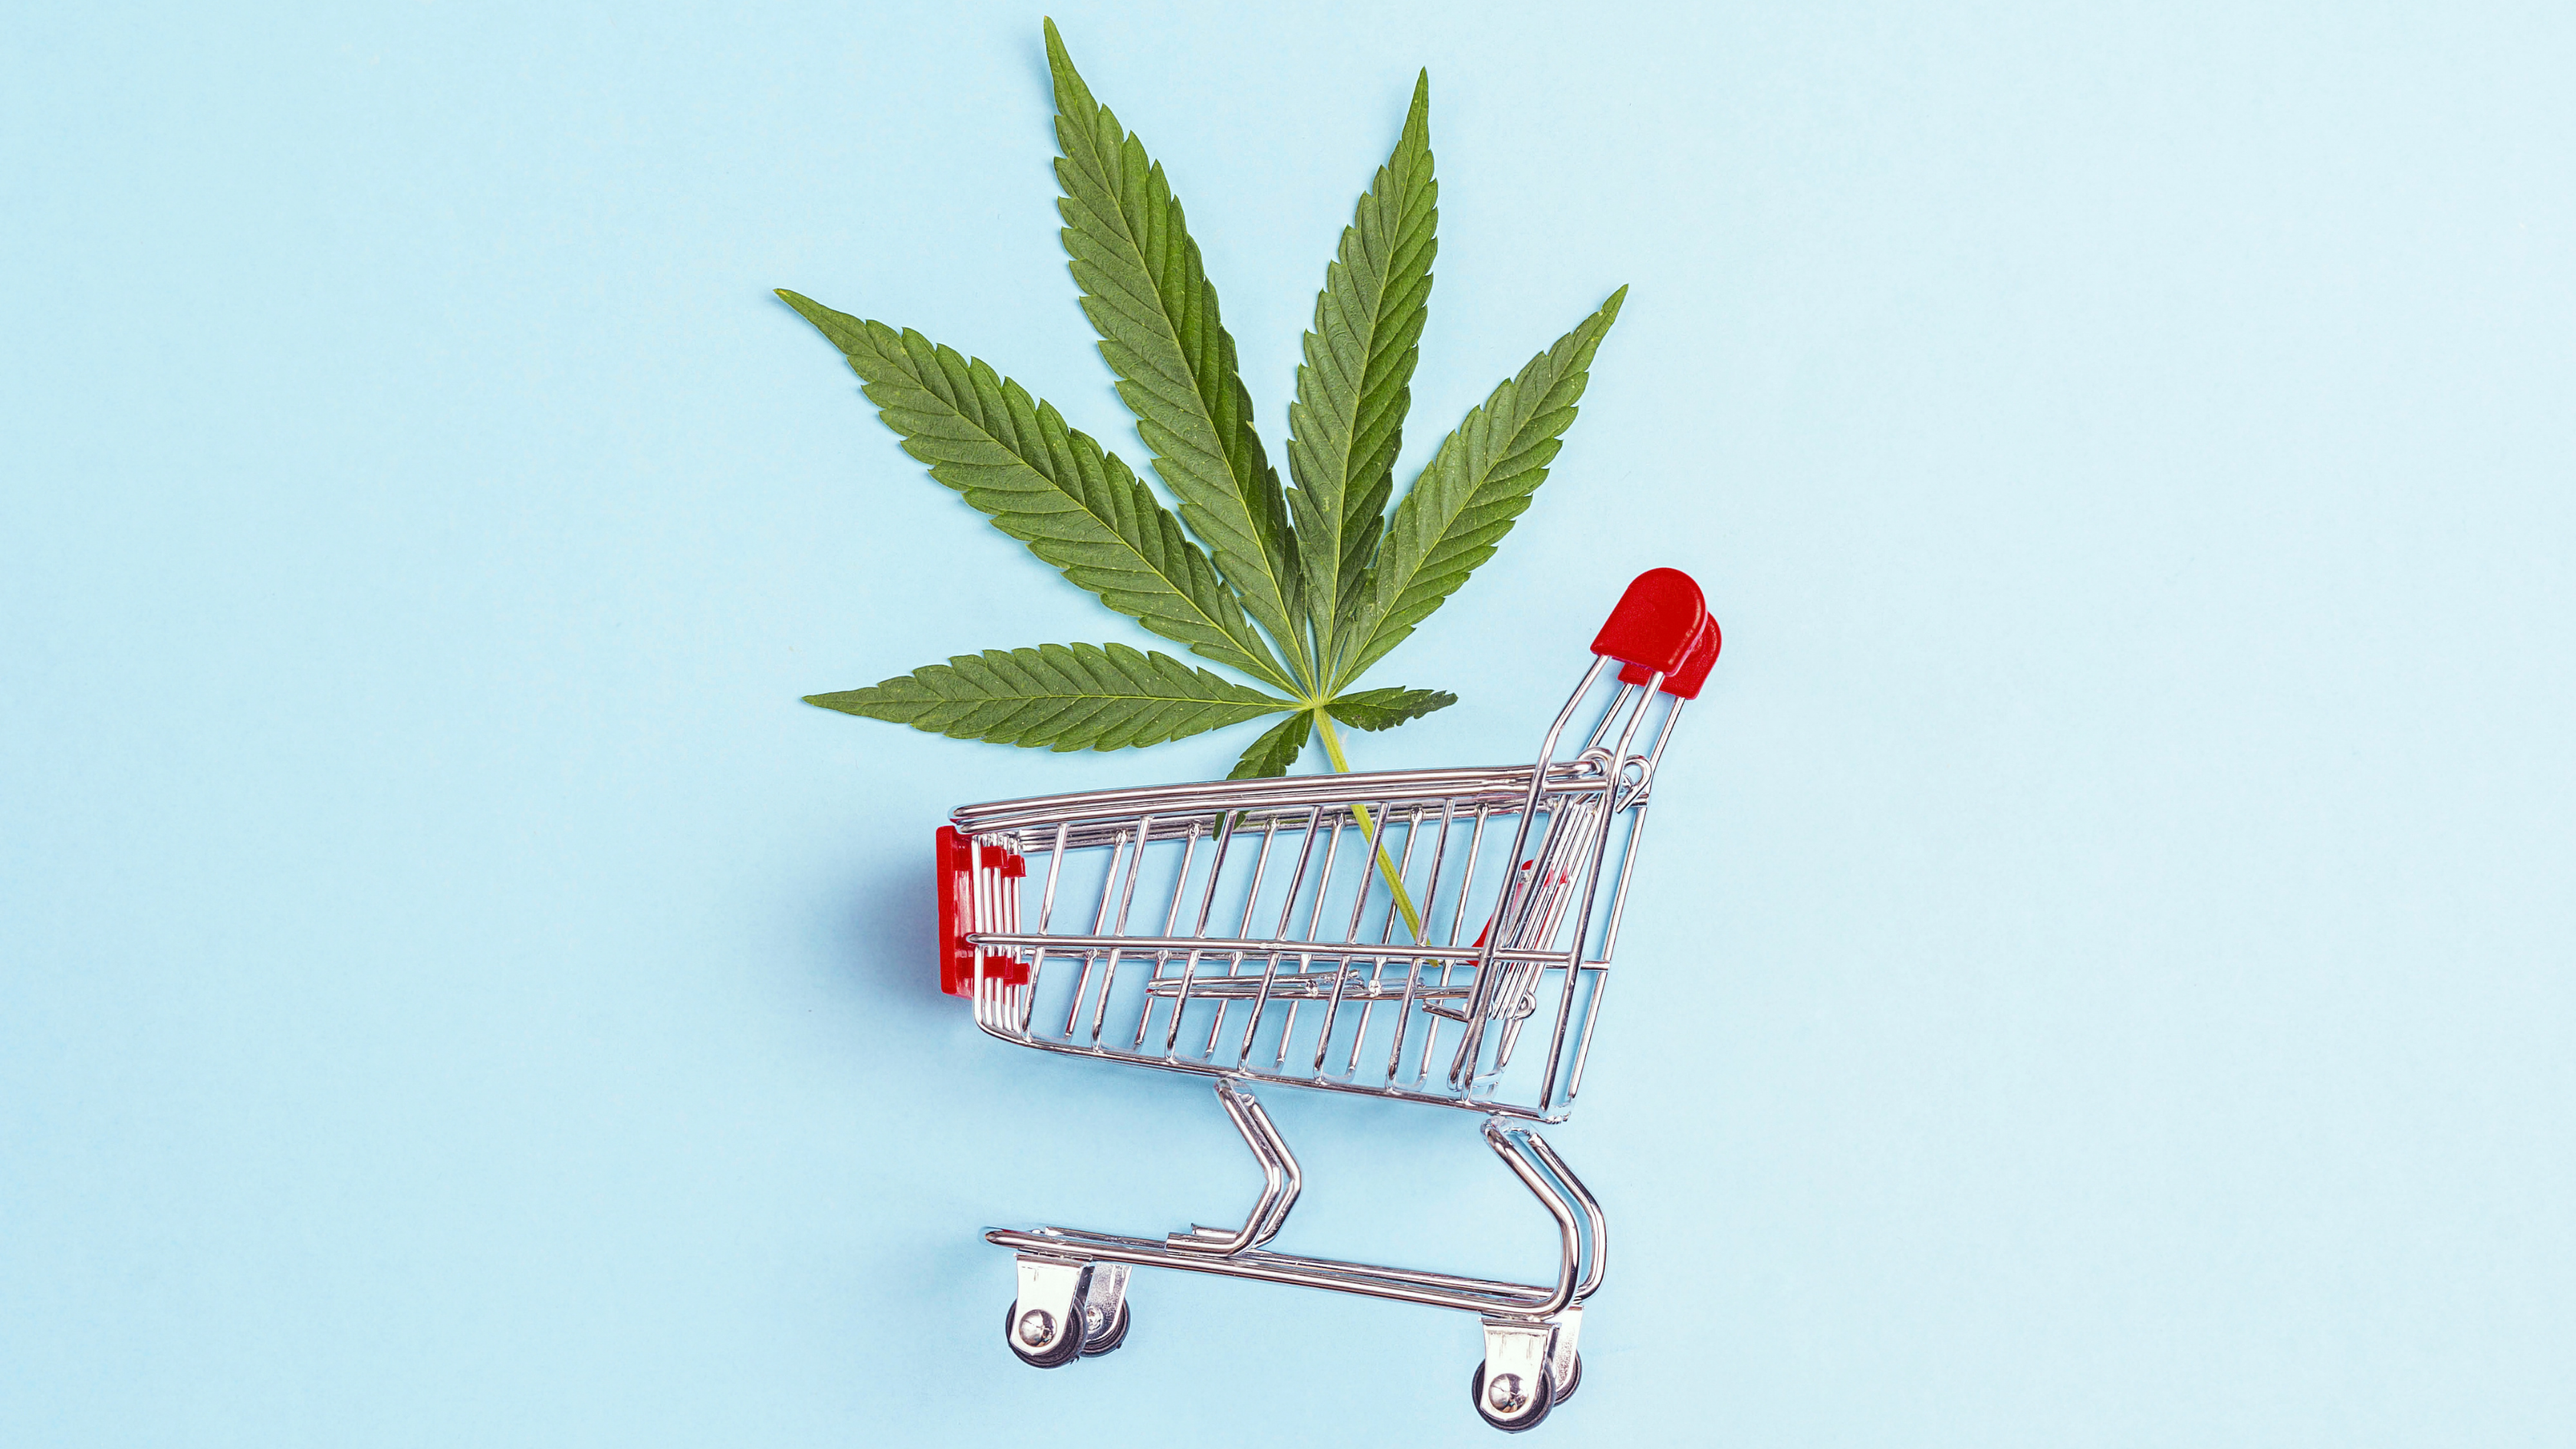 Tips for gauging cannabis consumer patterns for small businesses